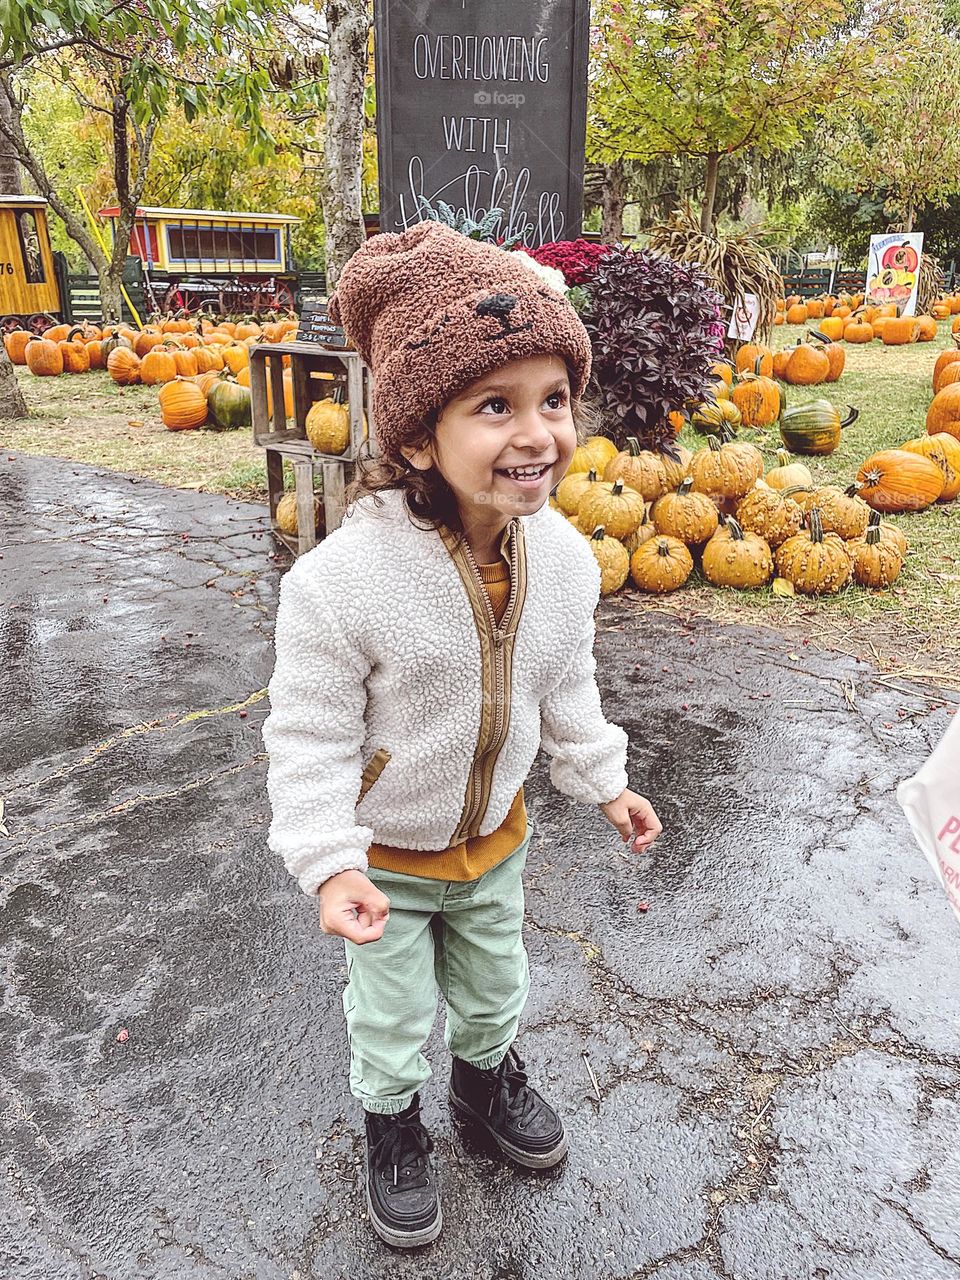 Toddler girl very excited about pumpkin patch, toddler lives fall, toddler at a pumpkin patch, excited about autumn, toddler having fun with pumpkins 